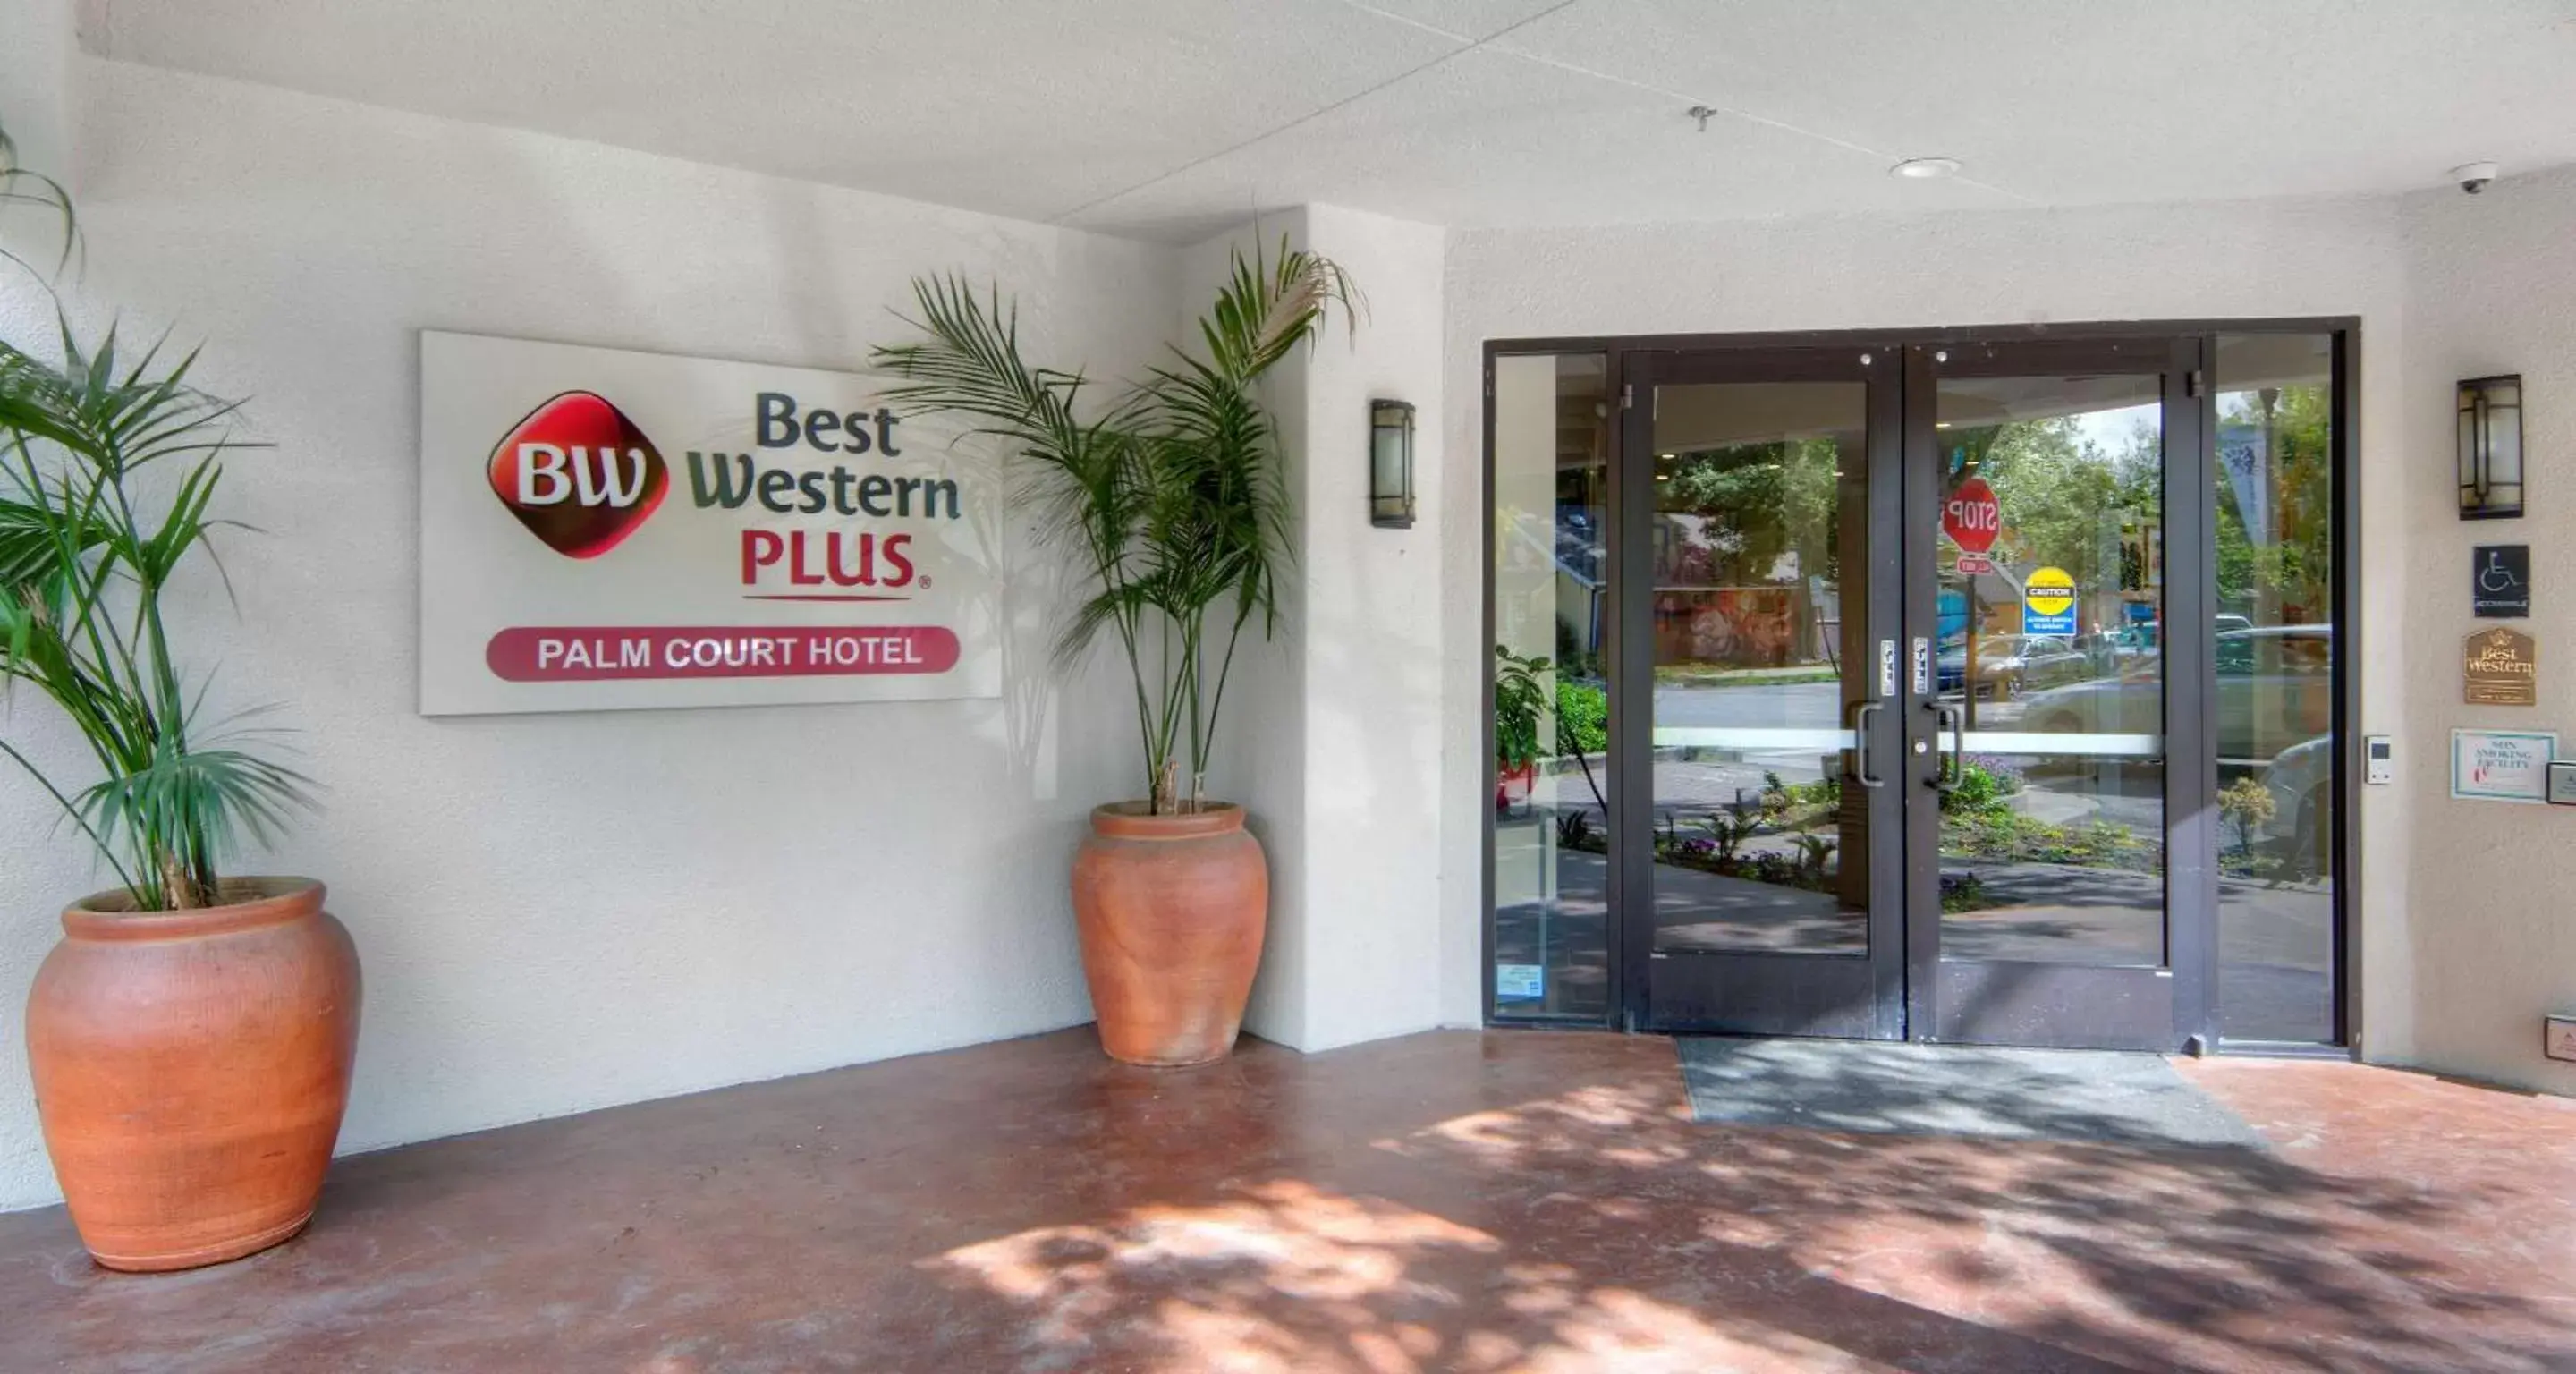 Property building in Best Western Plus Palm Court Hotel